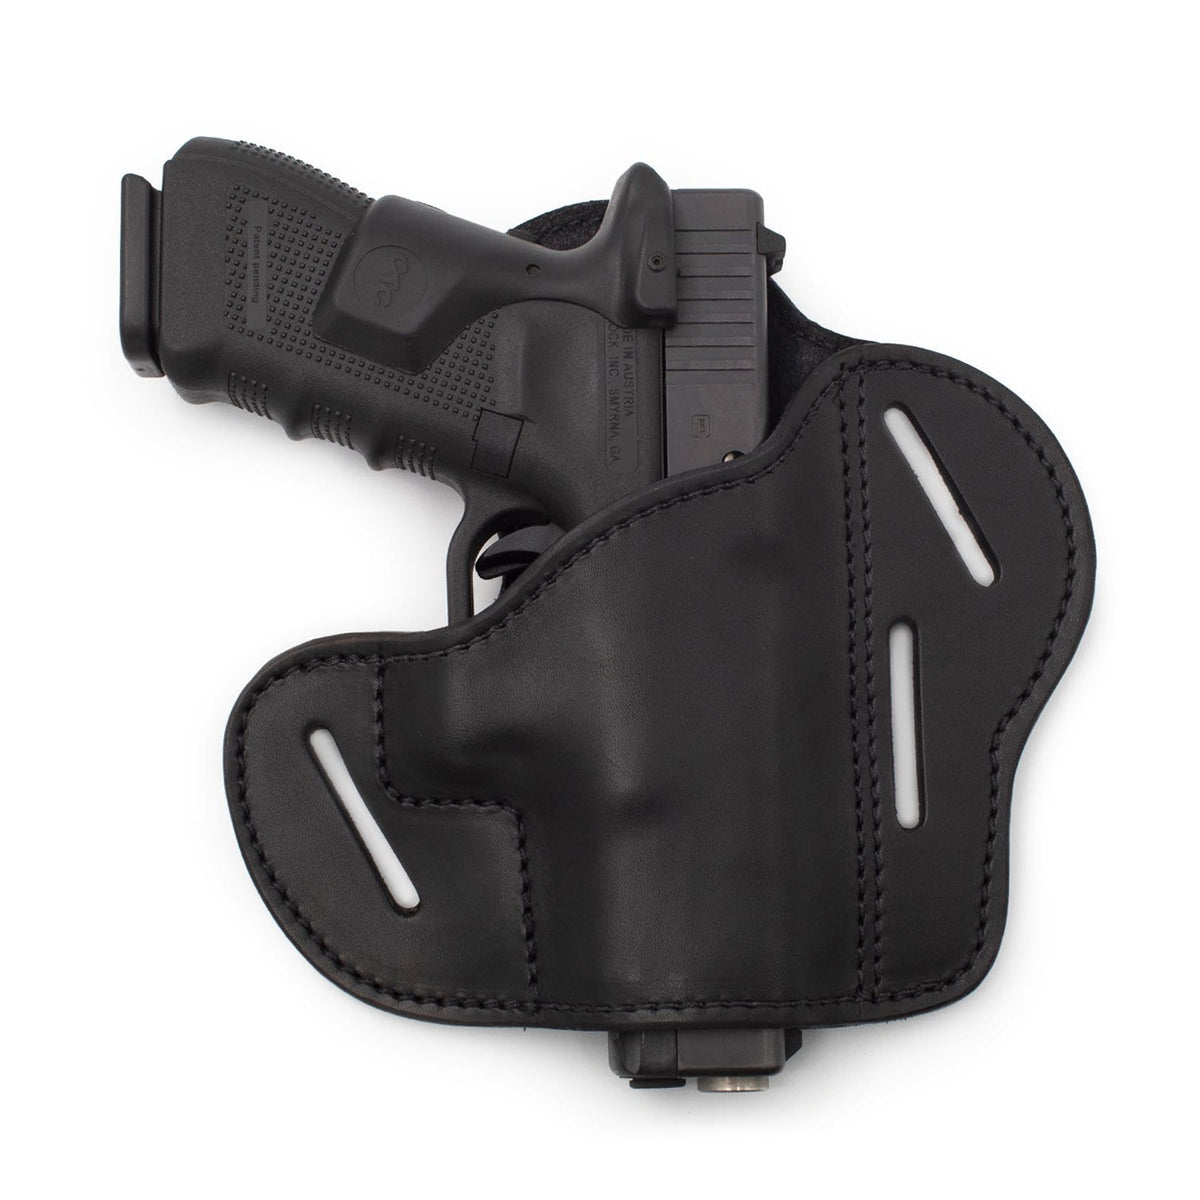 What Tactical Style Holsters Do We Use? 